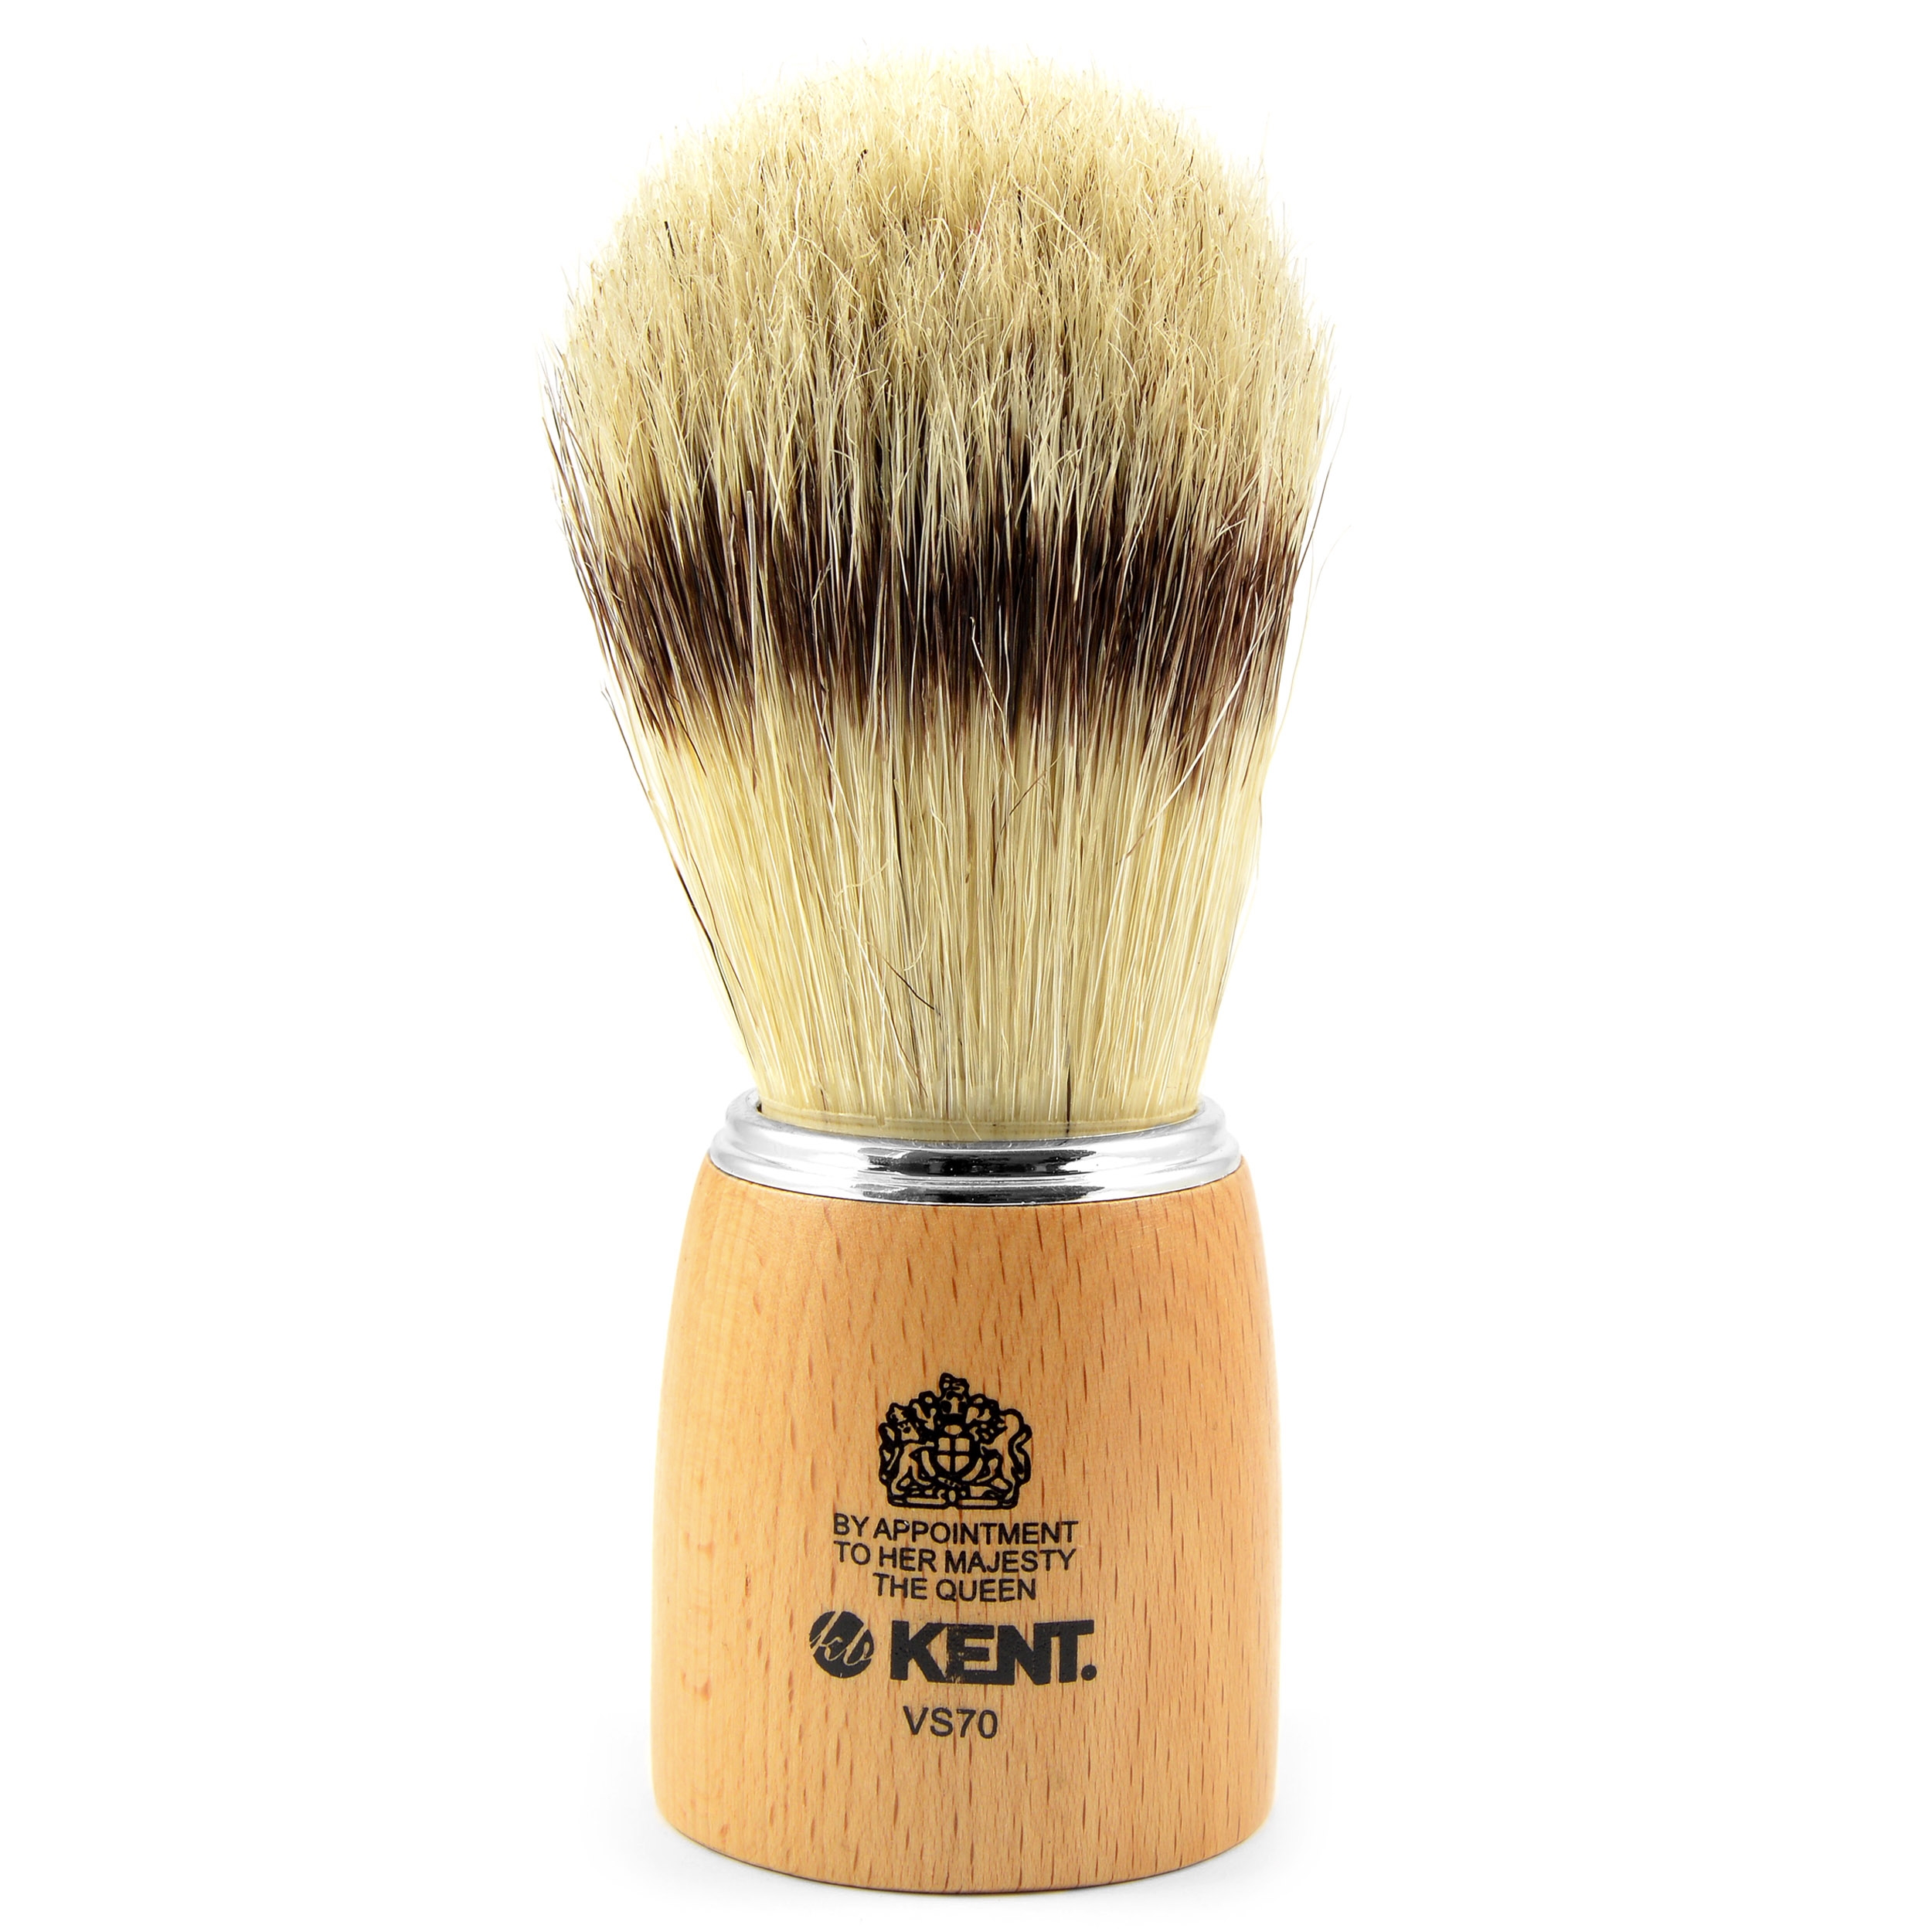 A guide to the best horse hair shaving brushes 